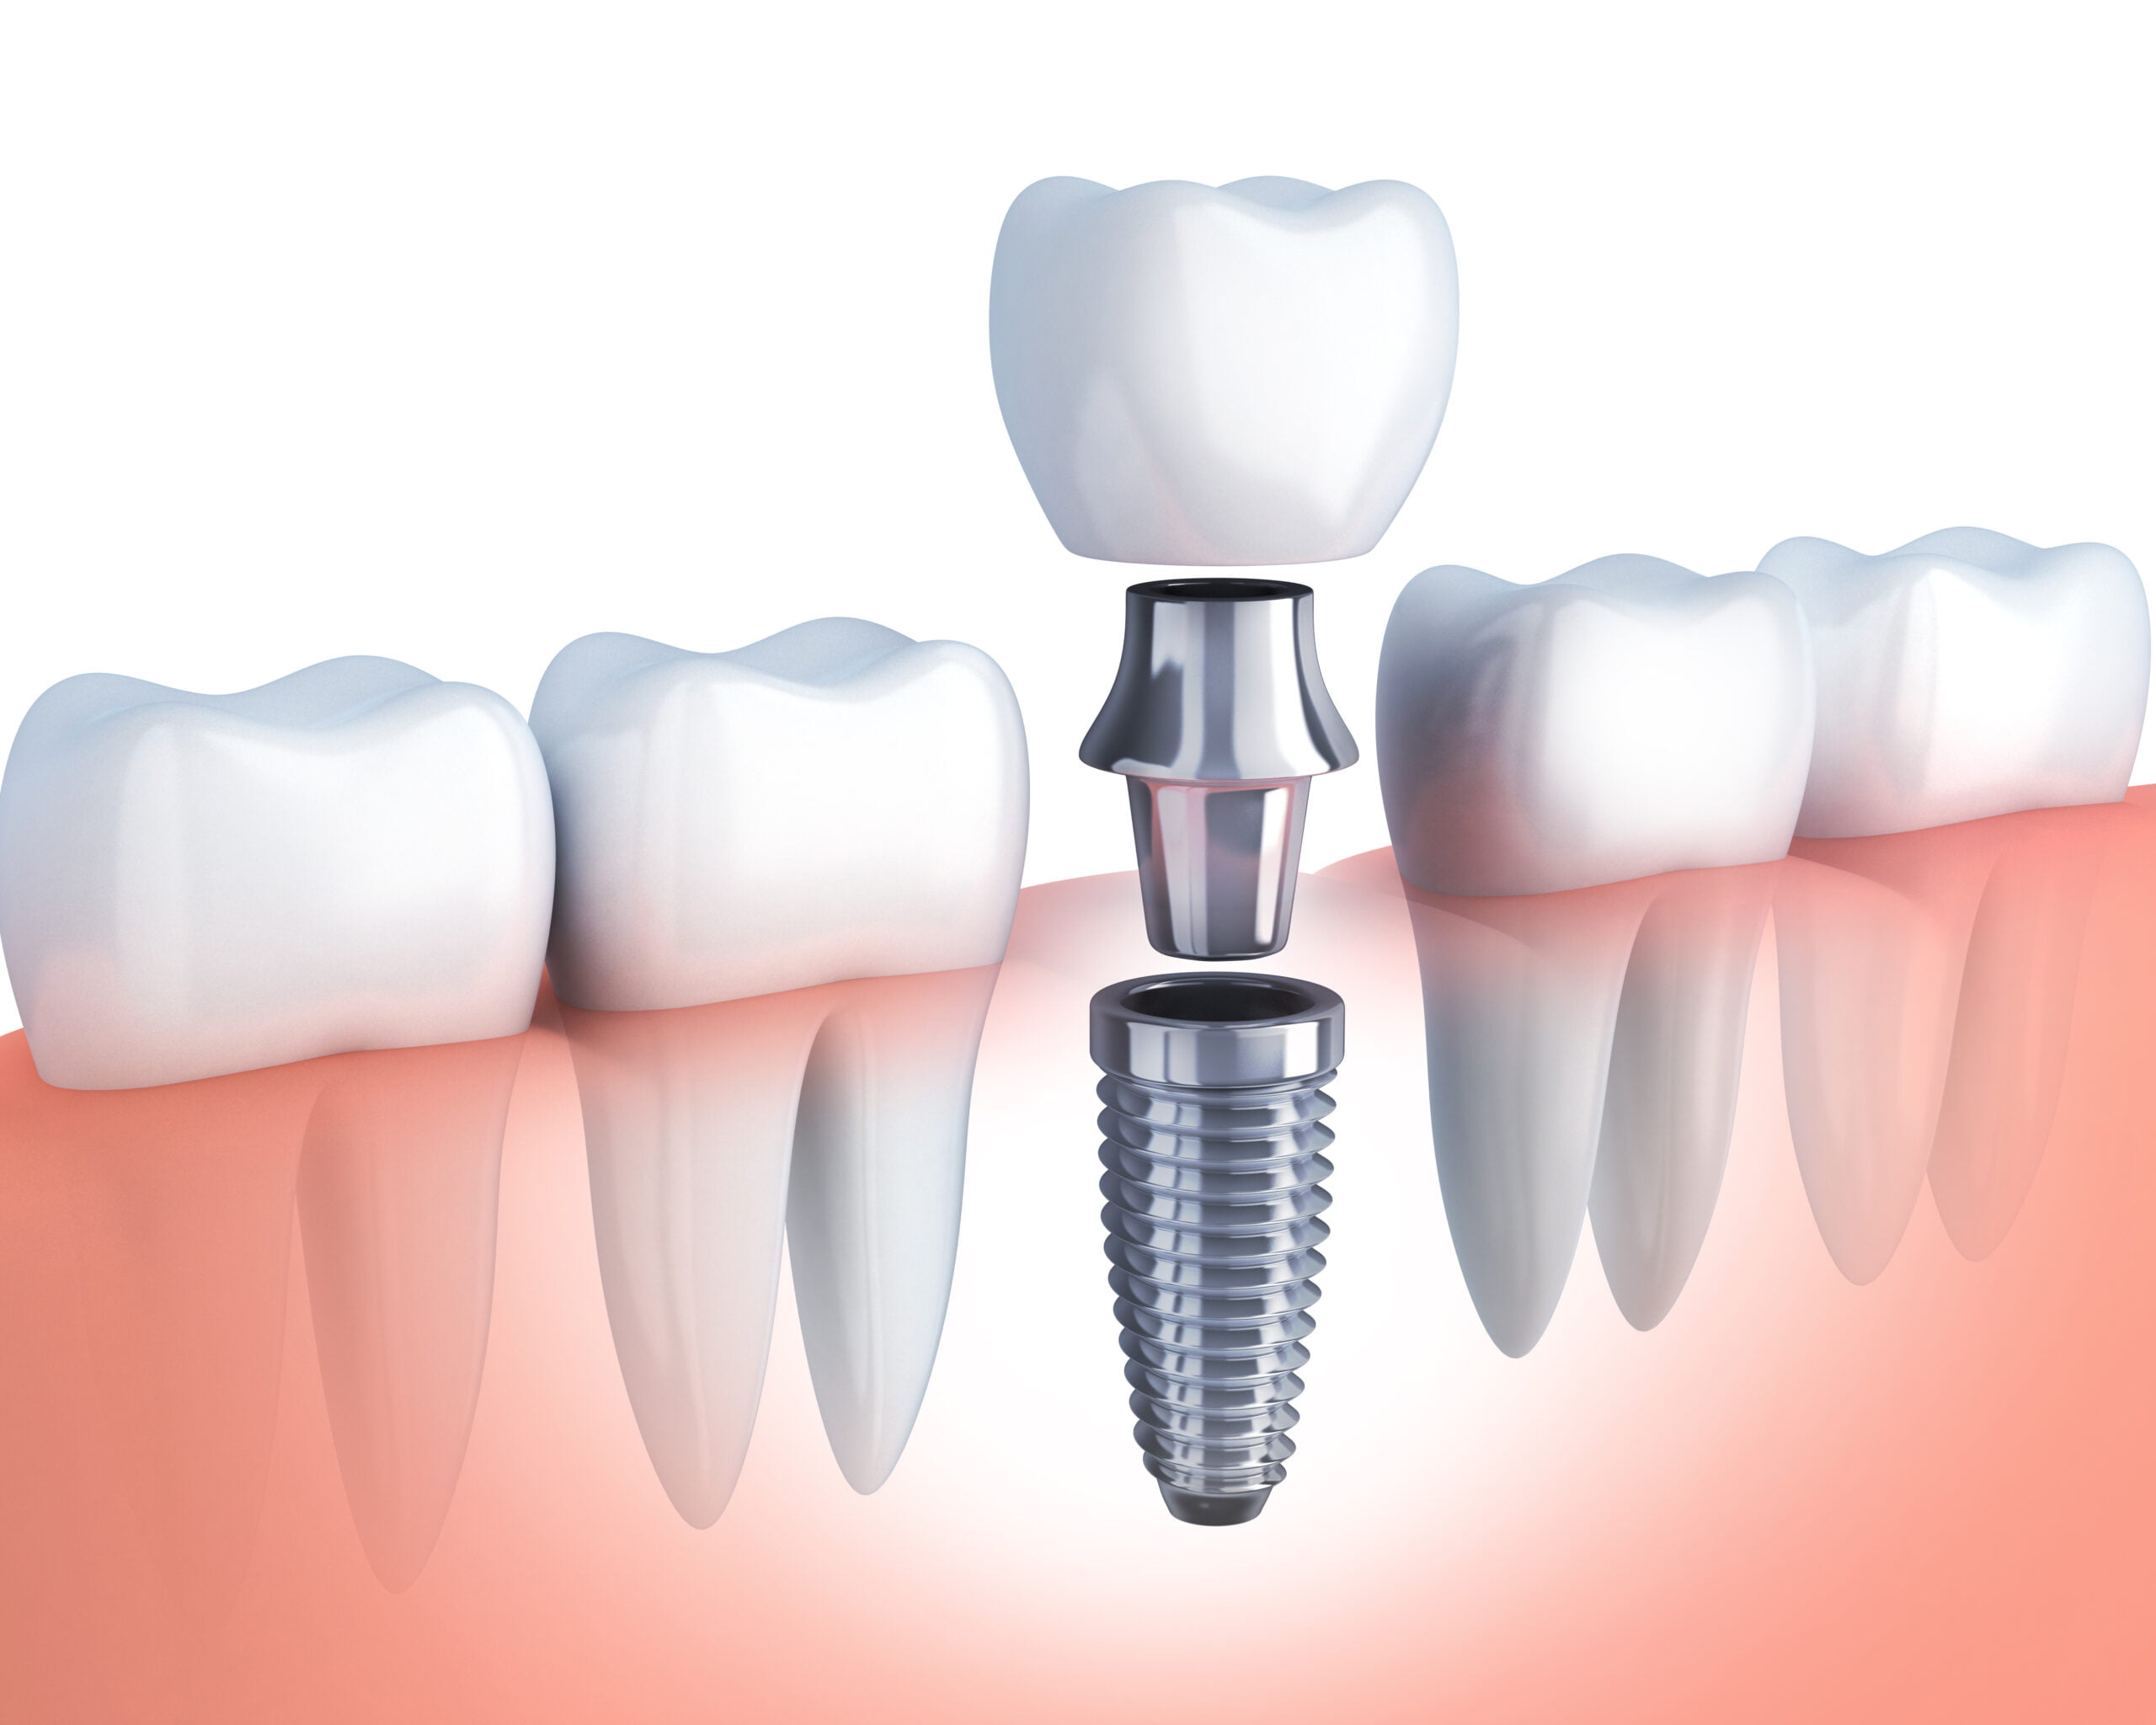 Is Caring for Dental Implants Different from Natural Teeth?